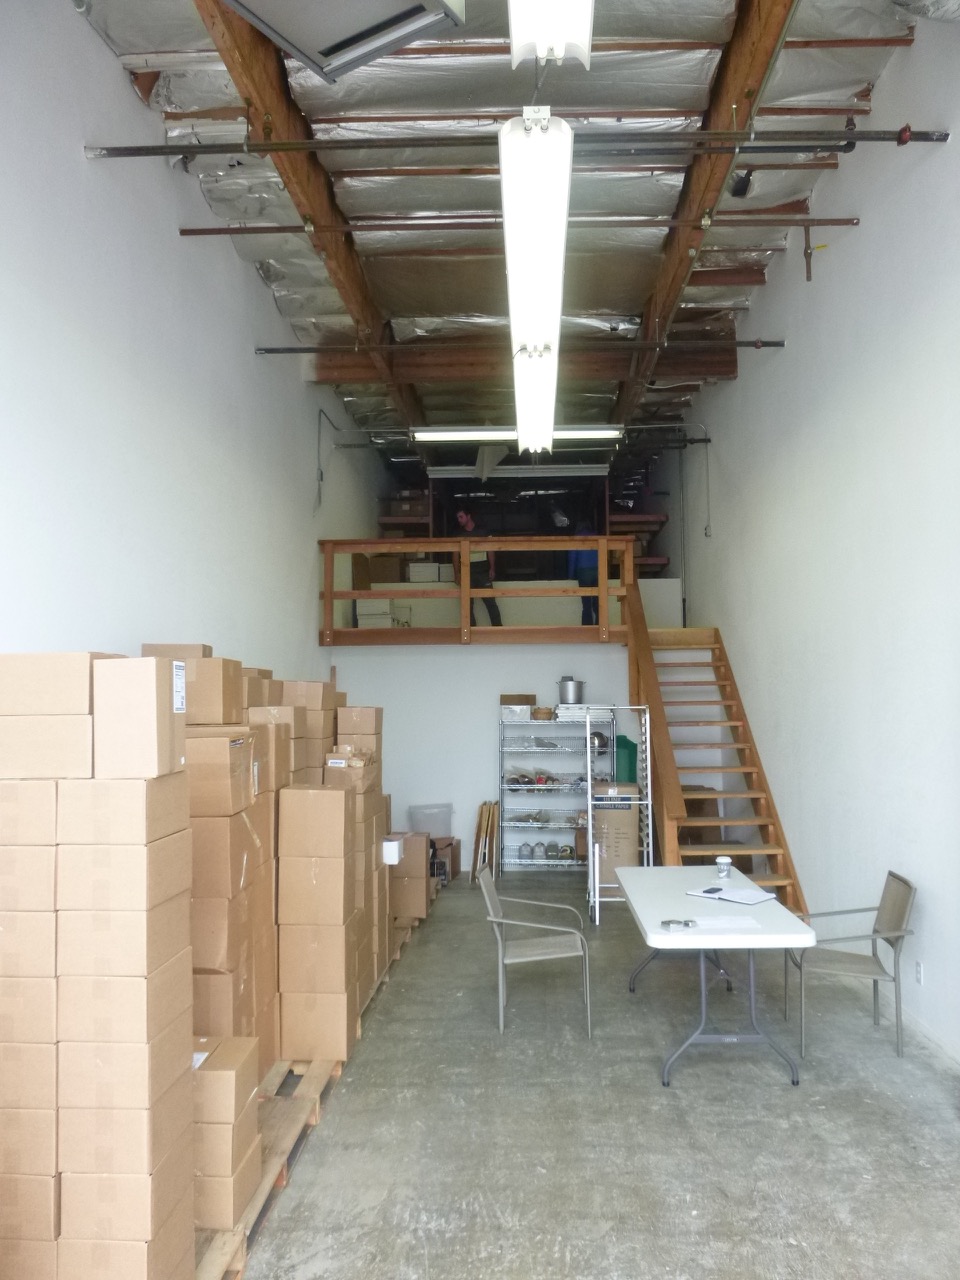  Job scope: Assist in the creation of a Mead &amp; Cider tasting room-brewery in Carpinteria, California, using locally salvaged and recycled materials.&nbsp;The space as it appeared prior to signing the lease. 